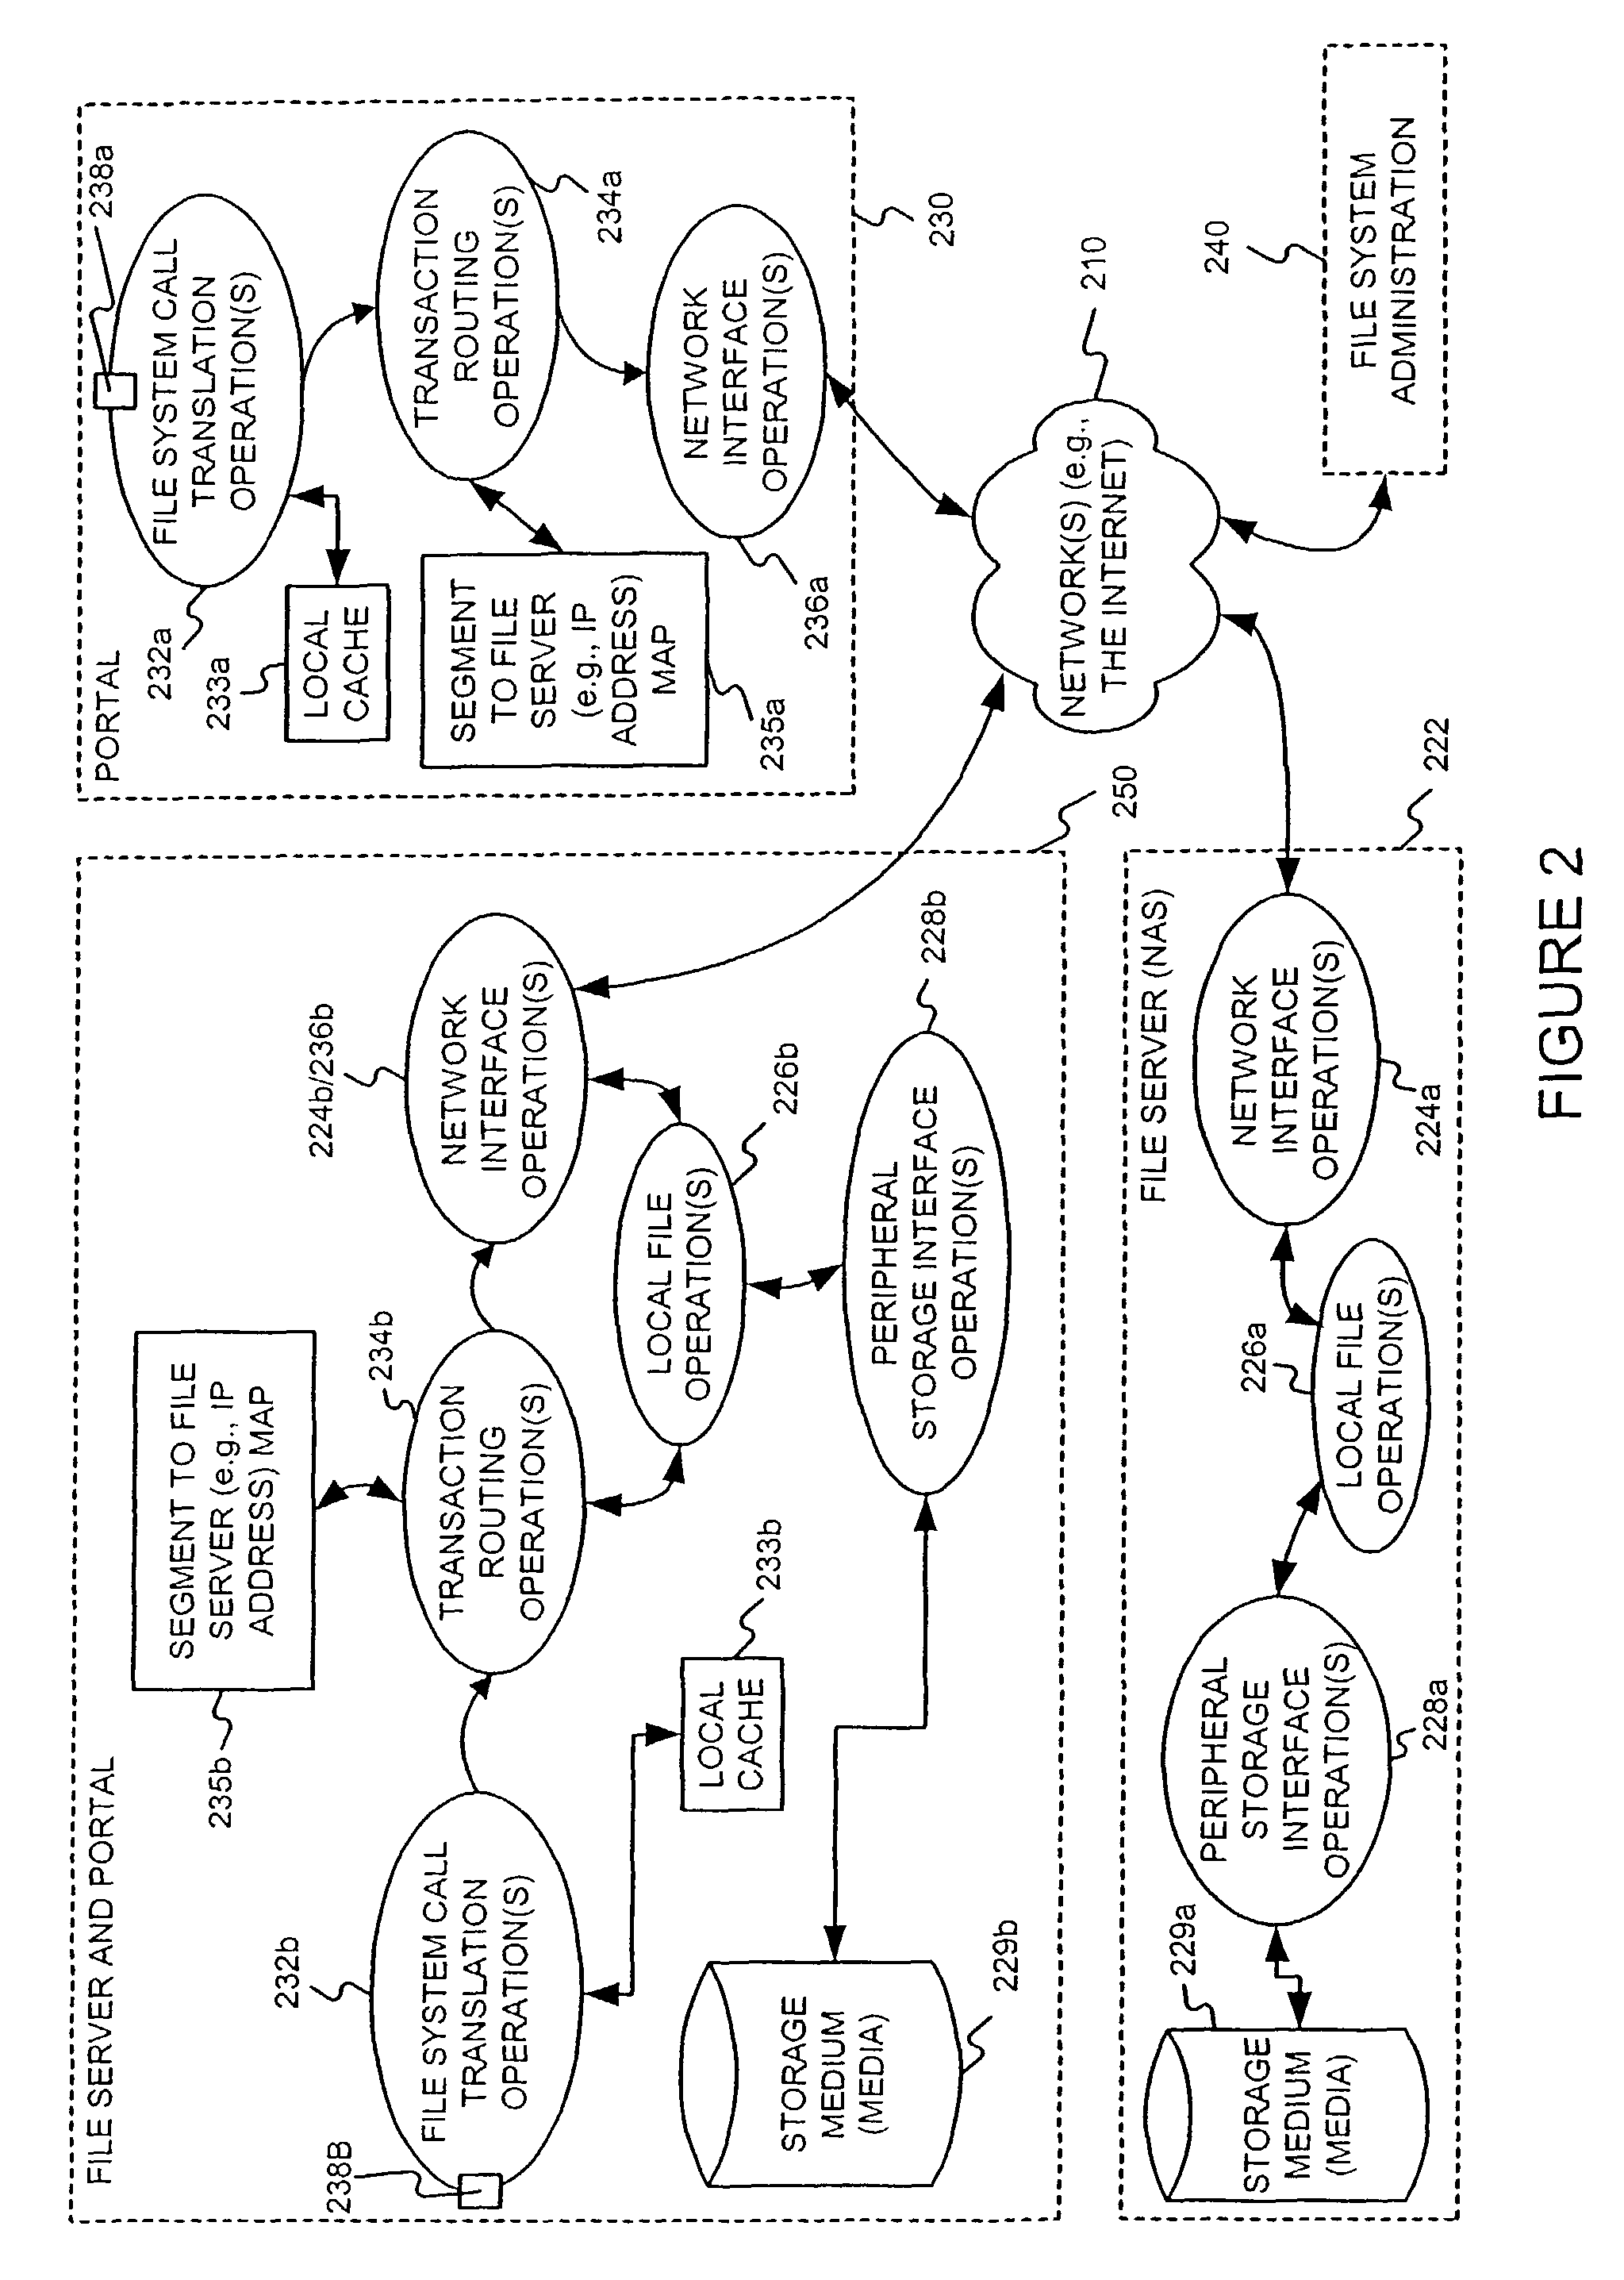 Independent data access in a segmented file system